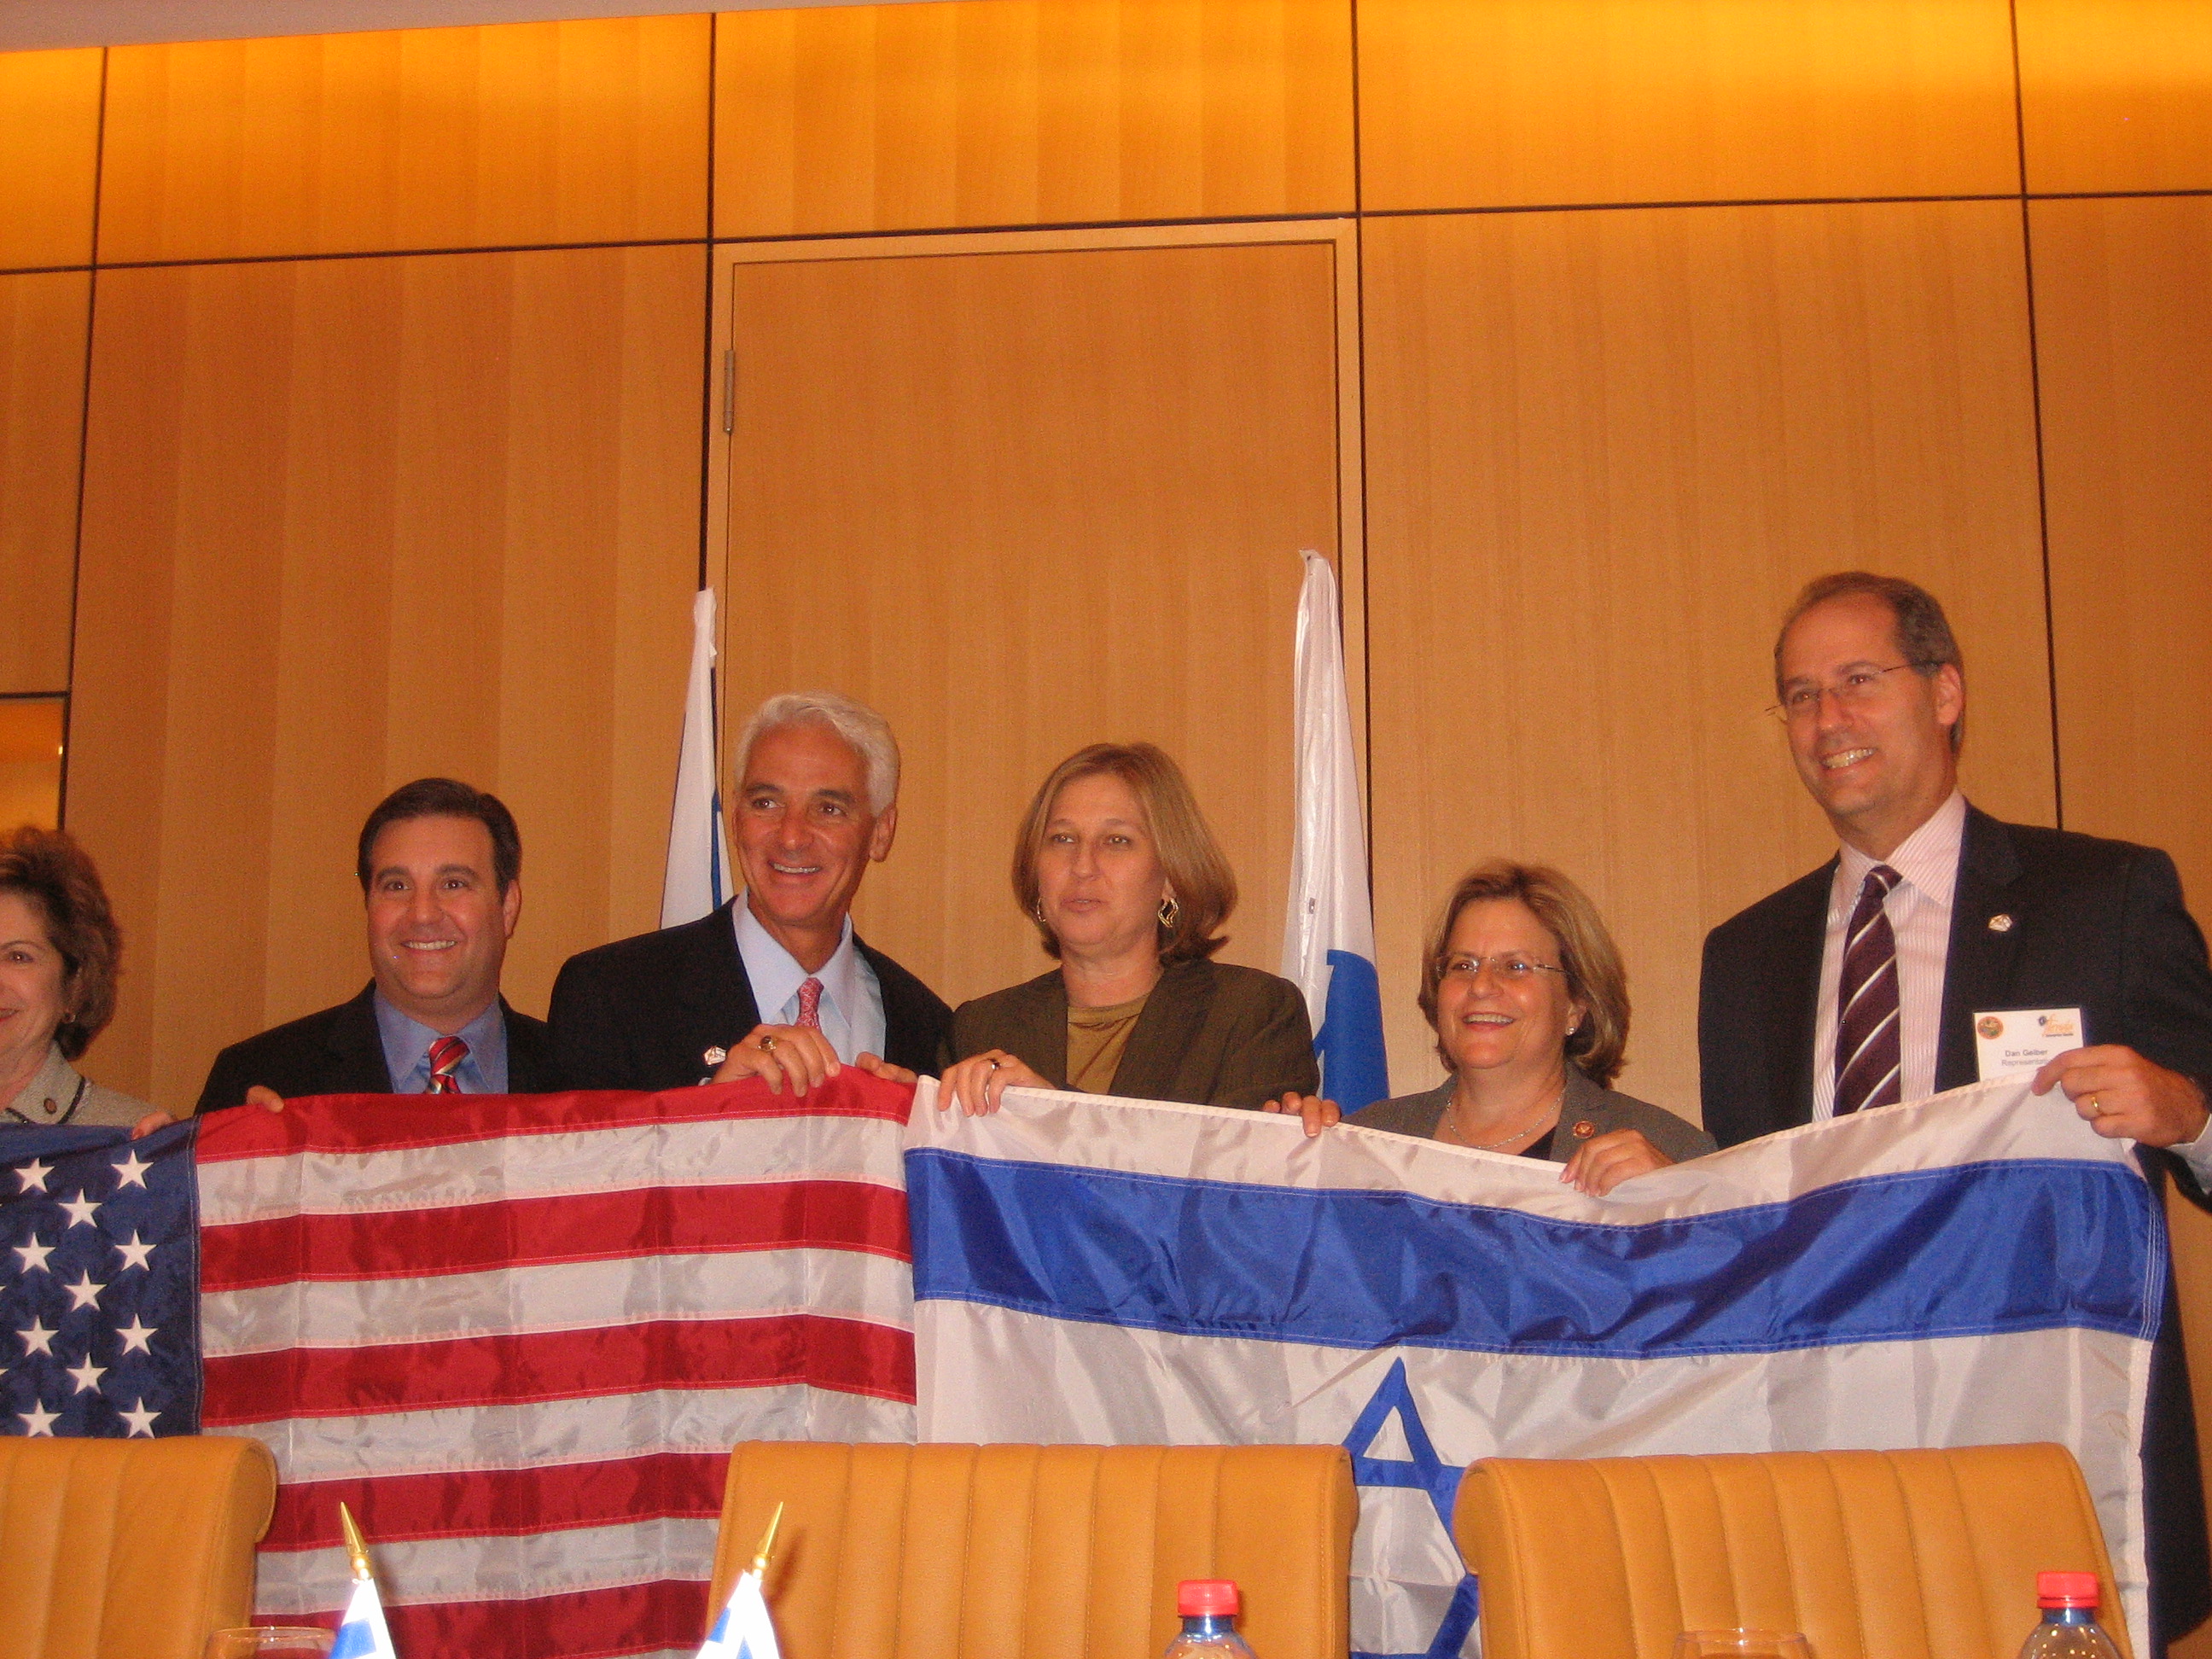 In a display of friendship, Ranking Member Ros-Lehtinen, Gov. Crist and Israeli Foreign Affairs Minister Tzipi Livni present the flags of the United States and Israel